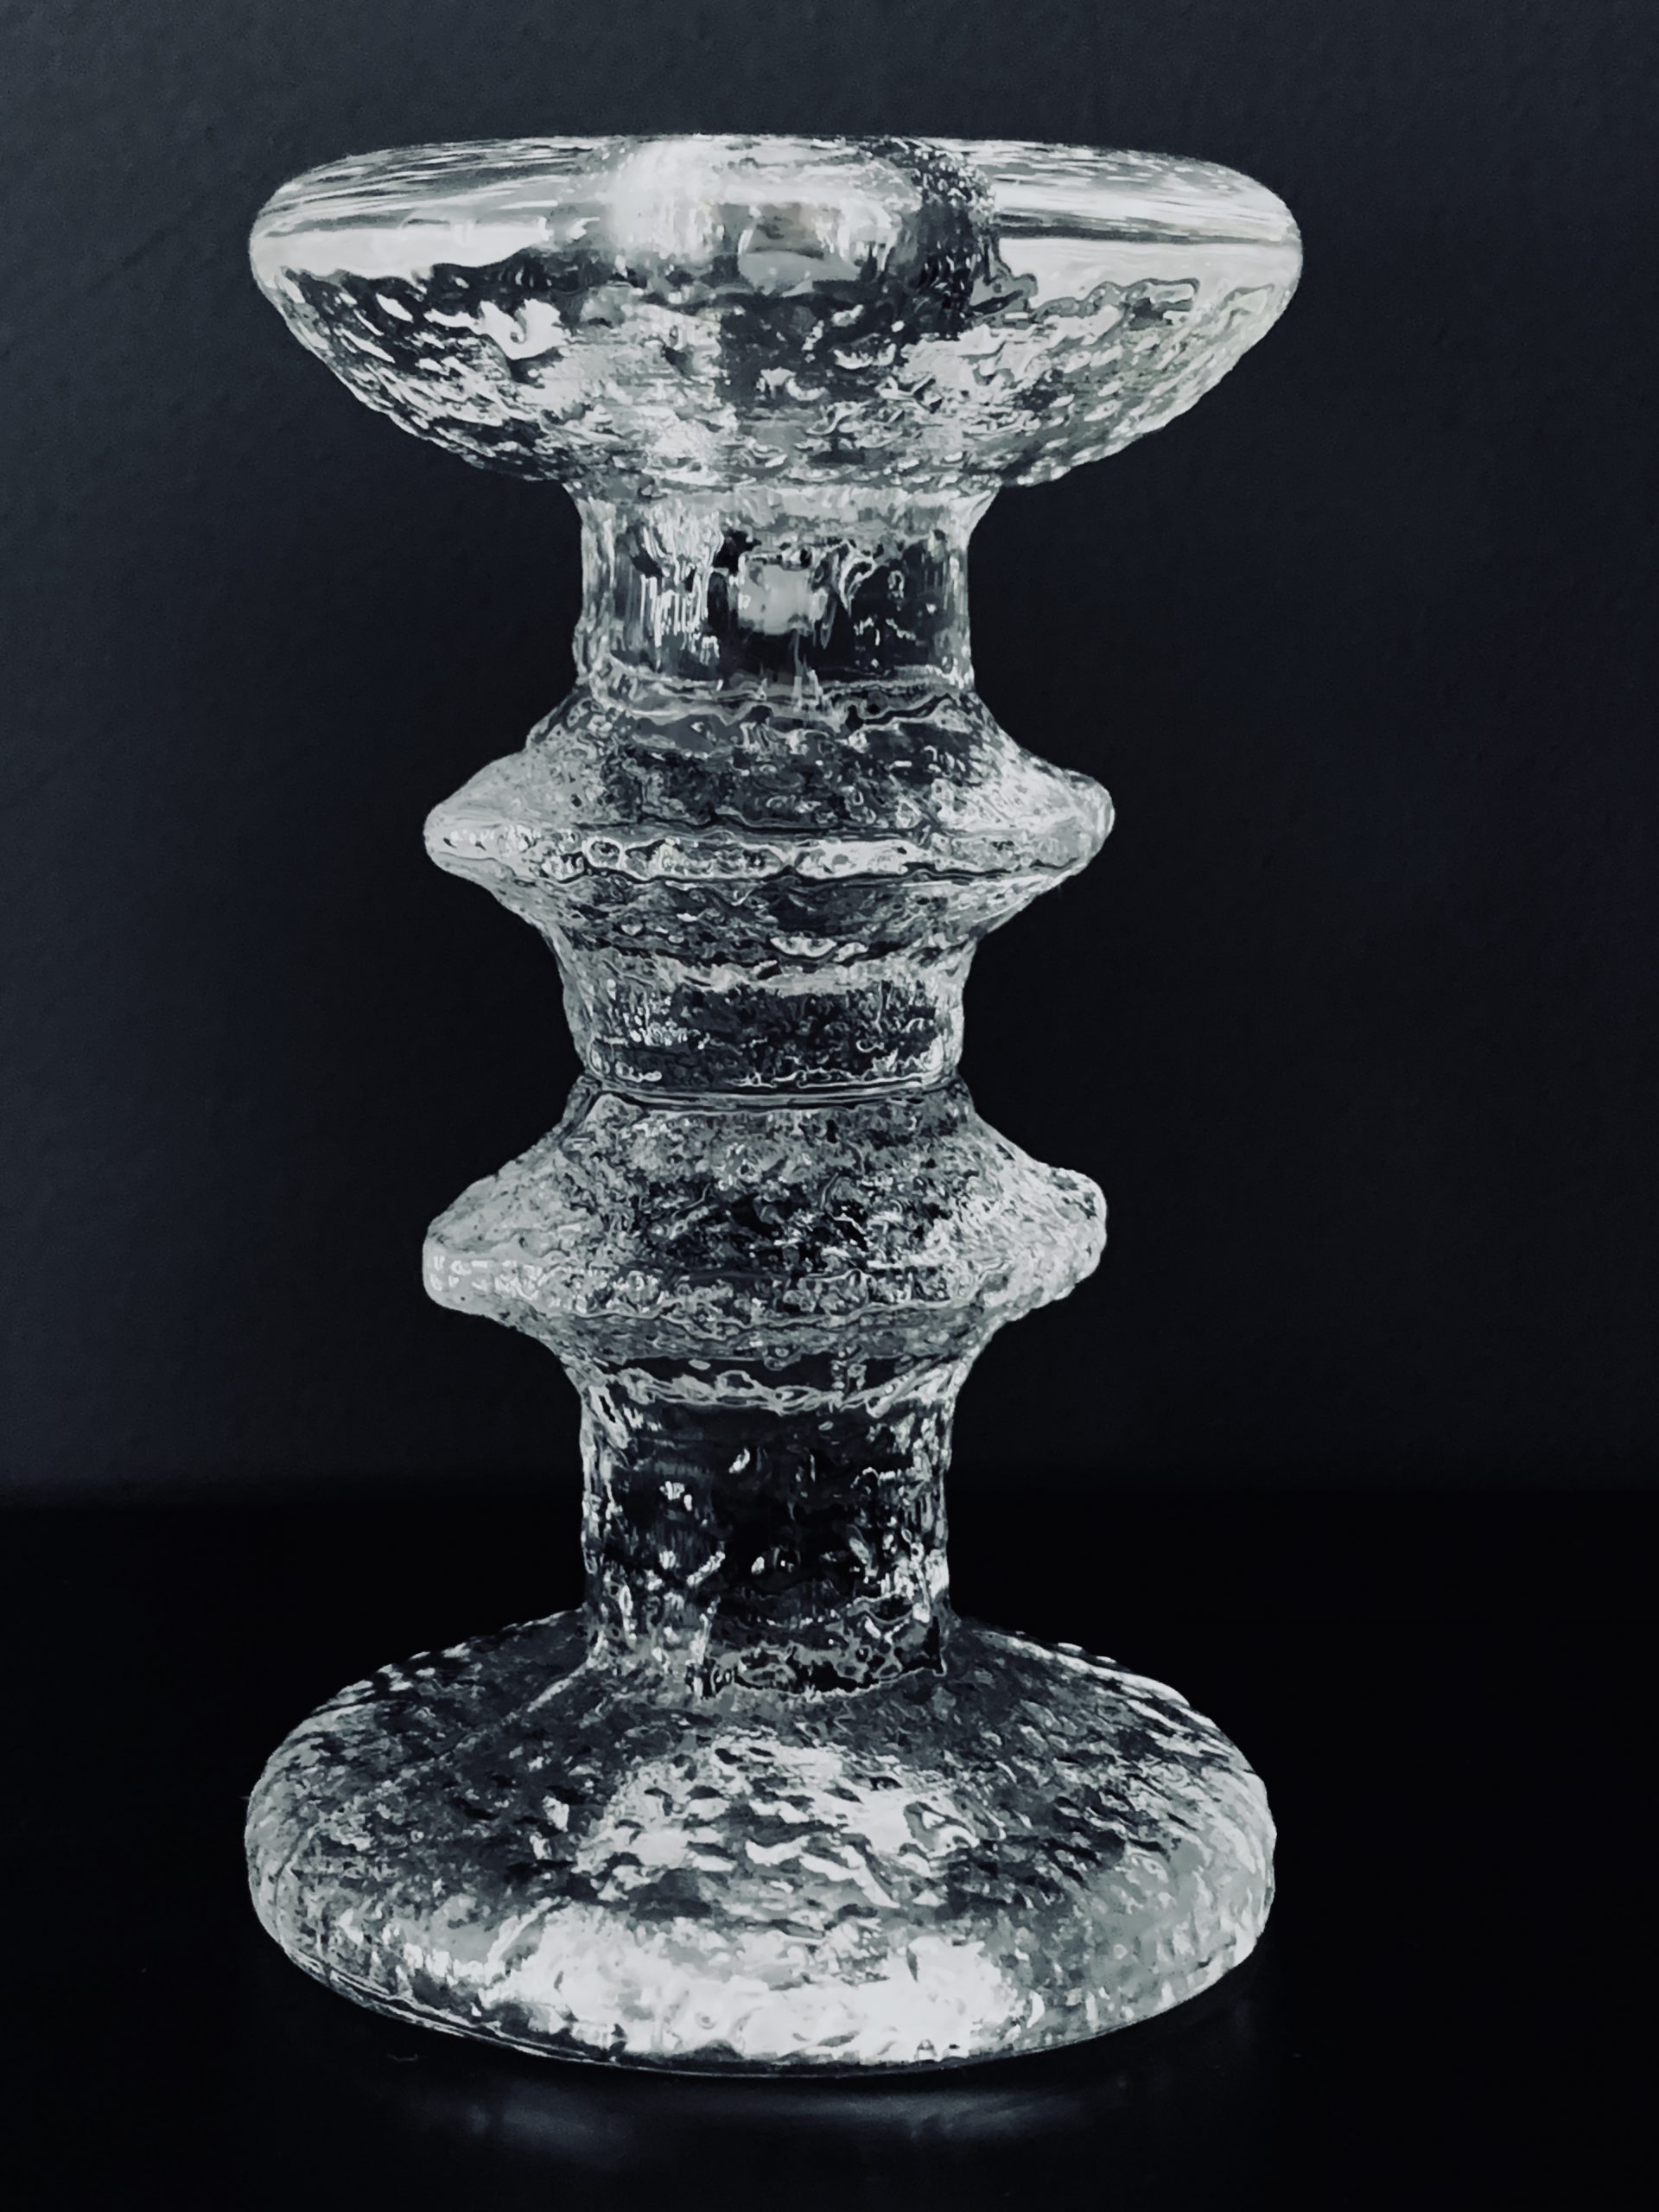 Image of the Iittala festivo candle holder 125 mm offered in this ad